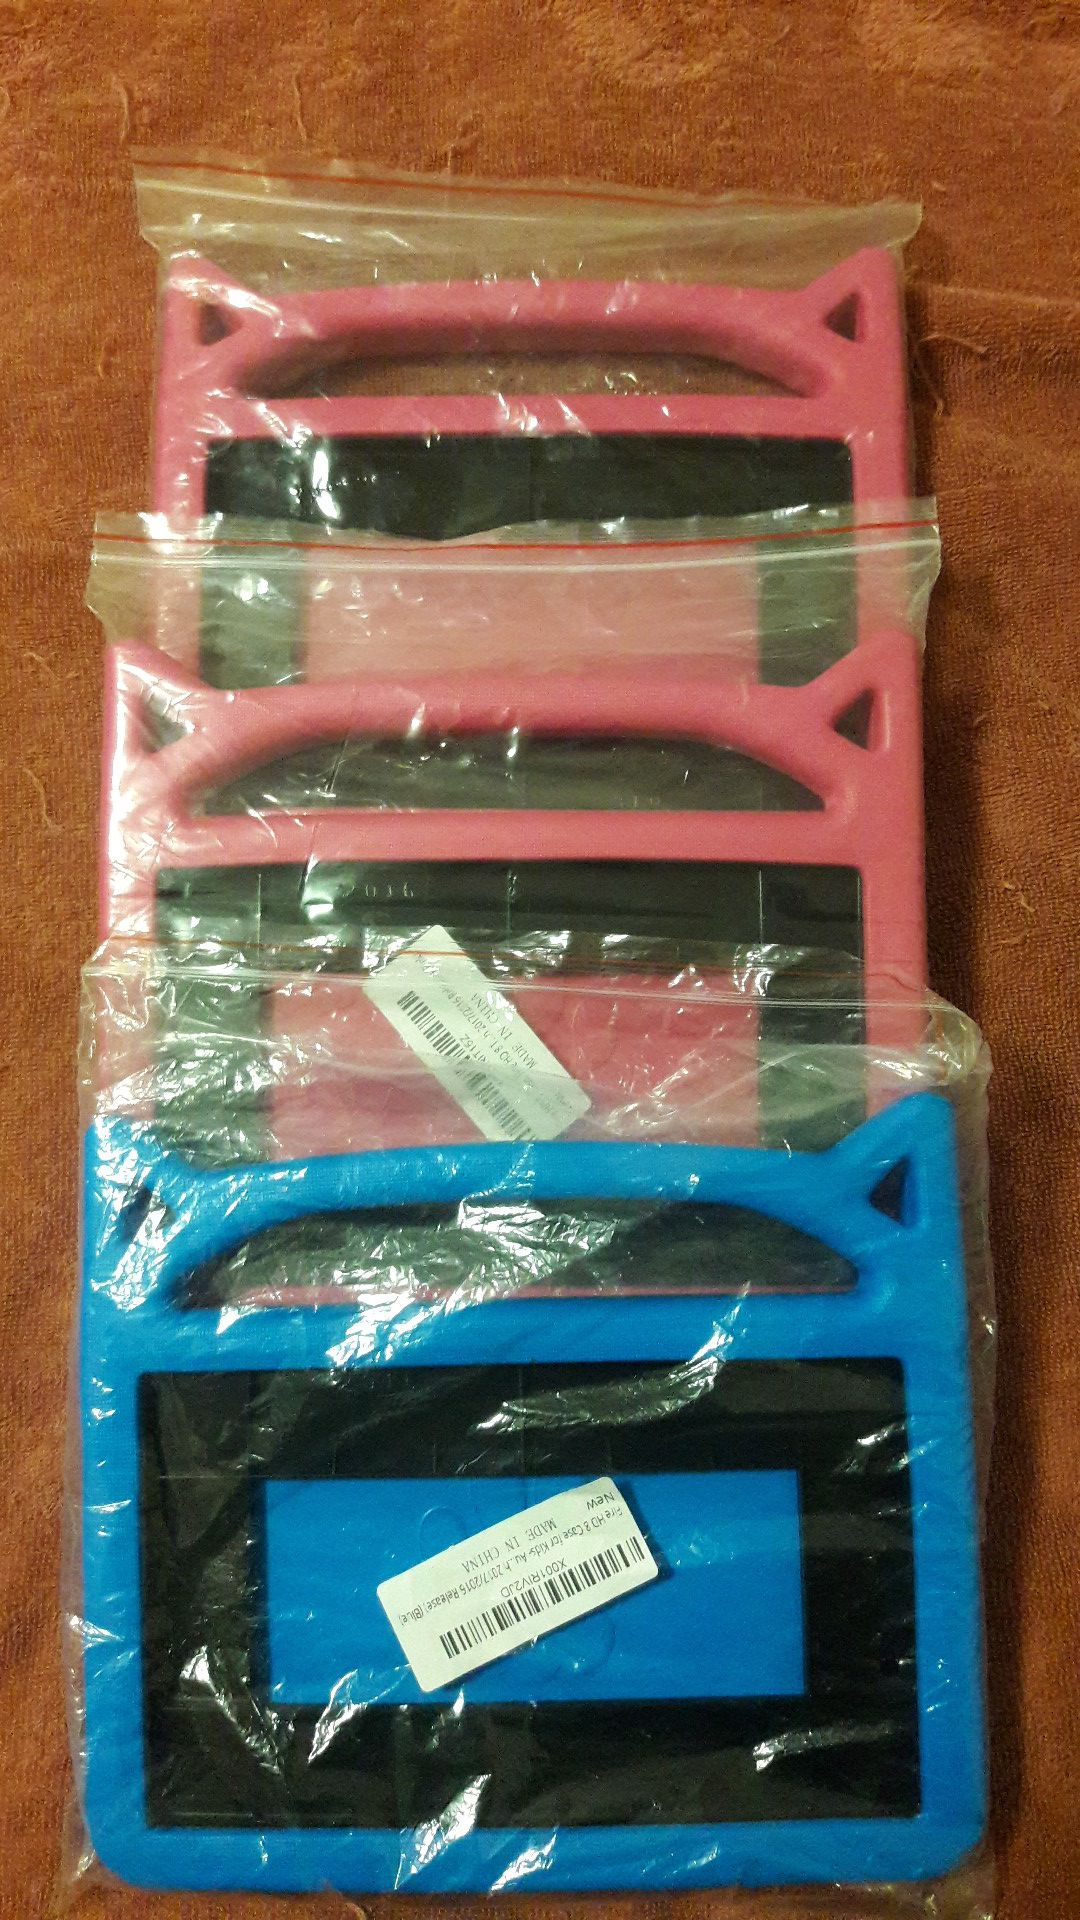 3 fire hd 8 /cases /2 pinks .1blue